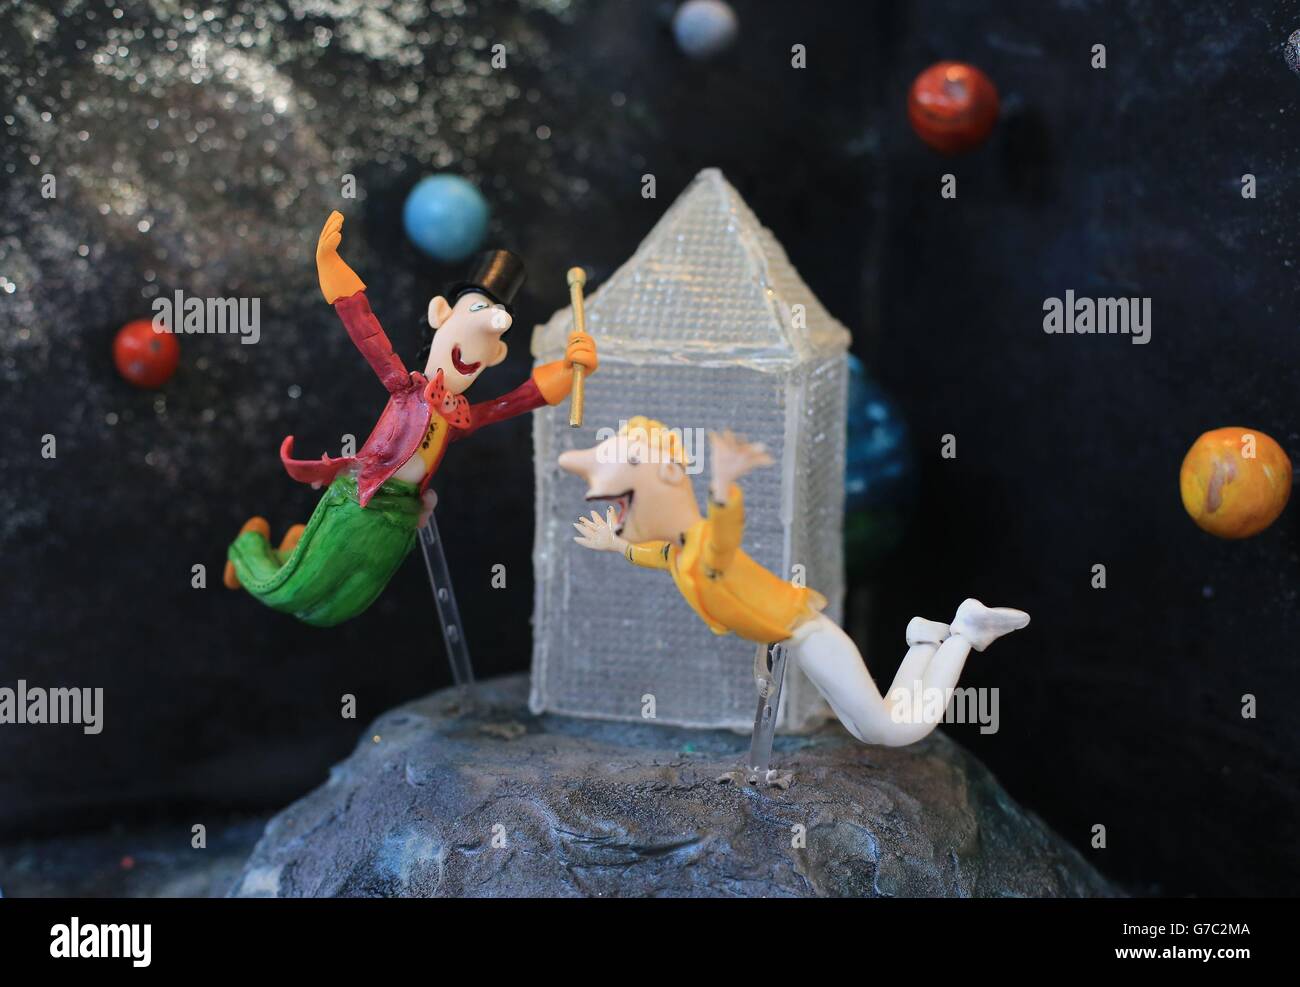 A cake depicting The Glass Elevator from Roald Dahl's book, Charlie and the Chocolate Factory made by Marisa Tamburrini as part of an exhibition of cakes celebrating Roald Dahl day on September 13 and the 50th anniversary of the children's book on display at the Ark gallery in Temple Bar Dublin. Stock Photo